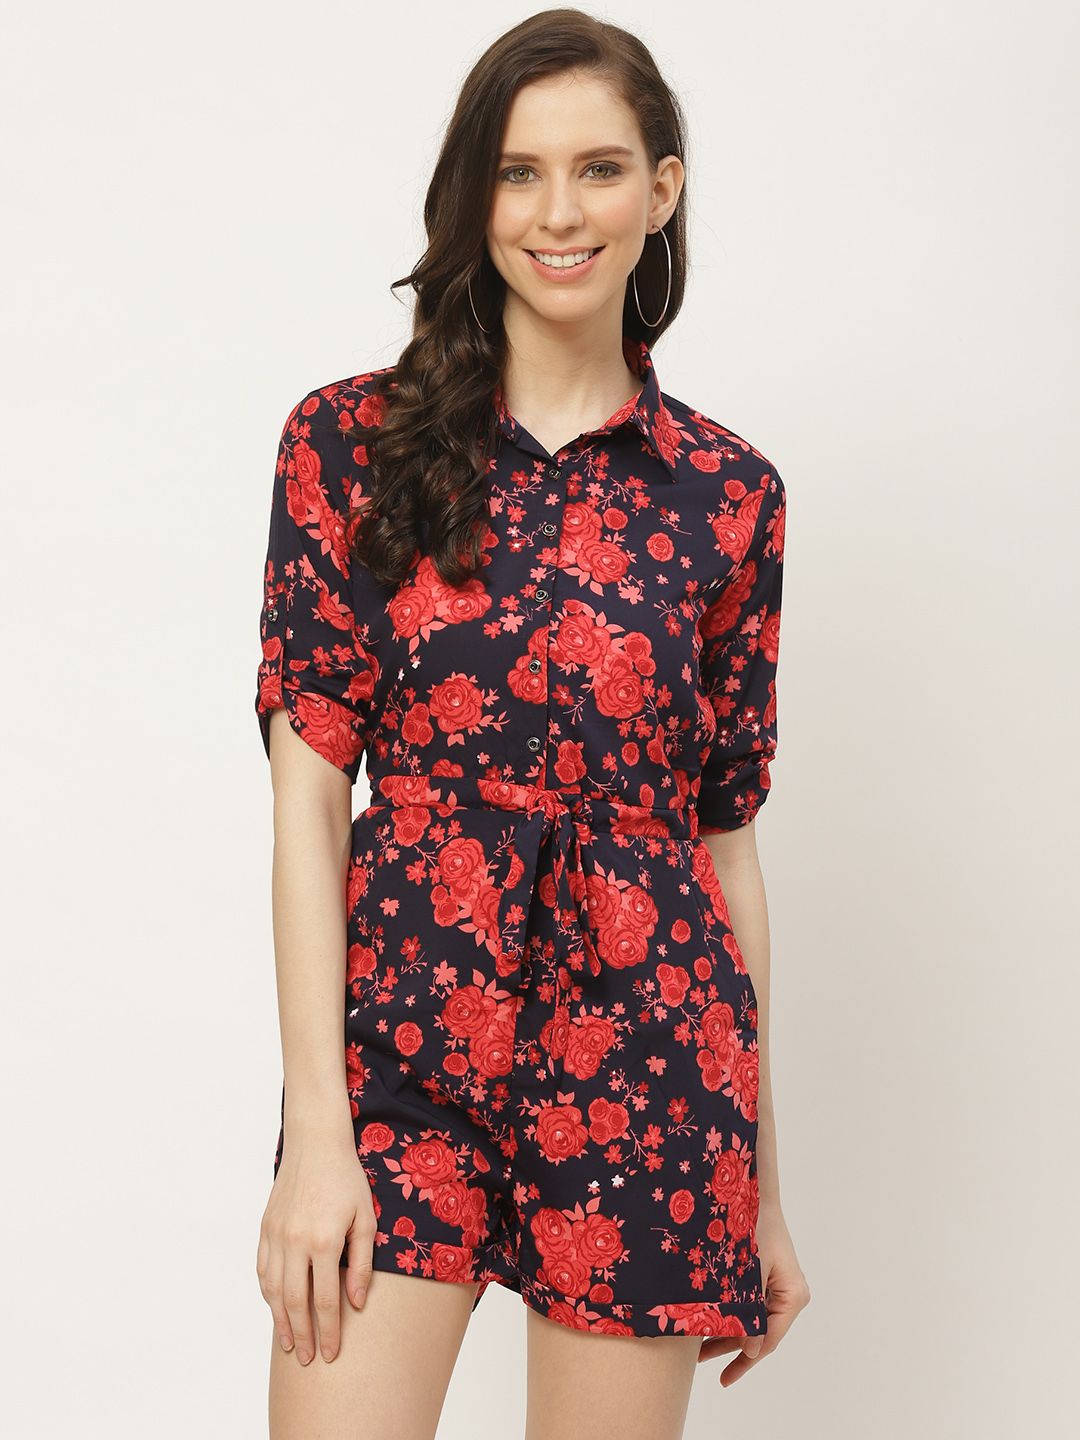 Cottinfab Women Navy Blue & Red Floral Printed Waist Tie-Up Playsuit Price in India